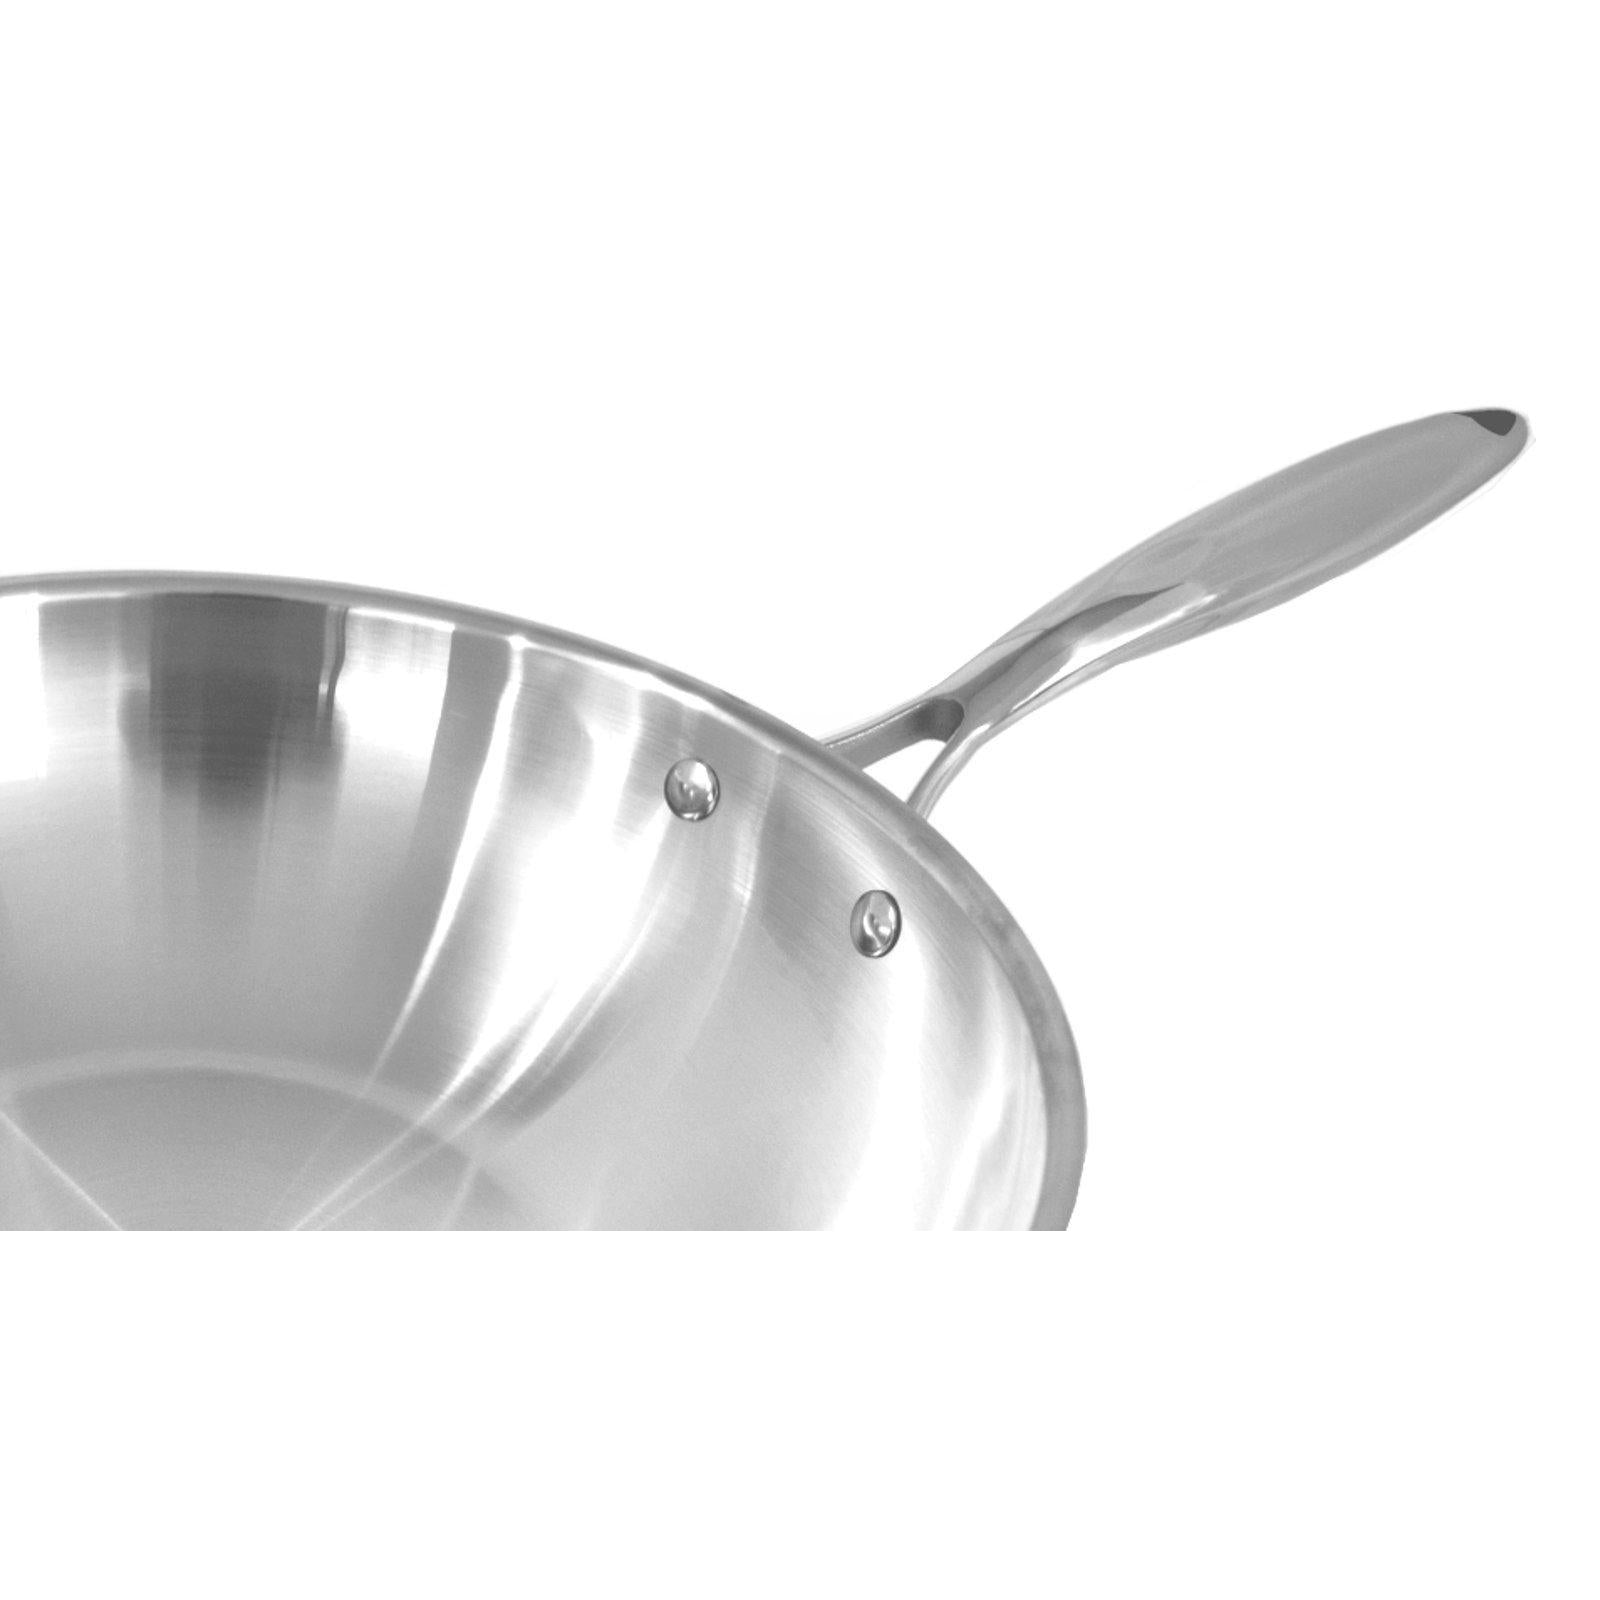 32 cm Stainless Steel Wok - Induction Compatible-Stainless Steel Cookware-Chef's Quality Cookware